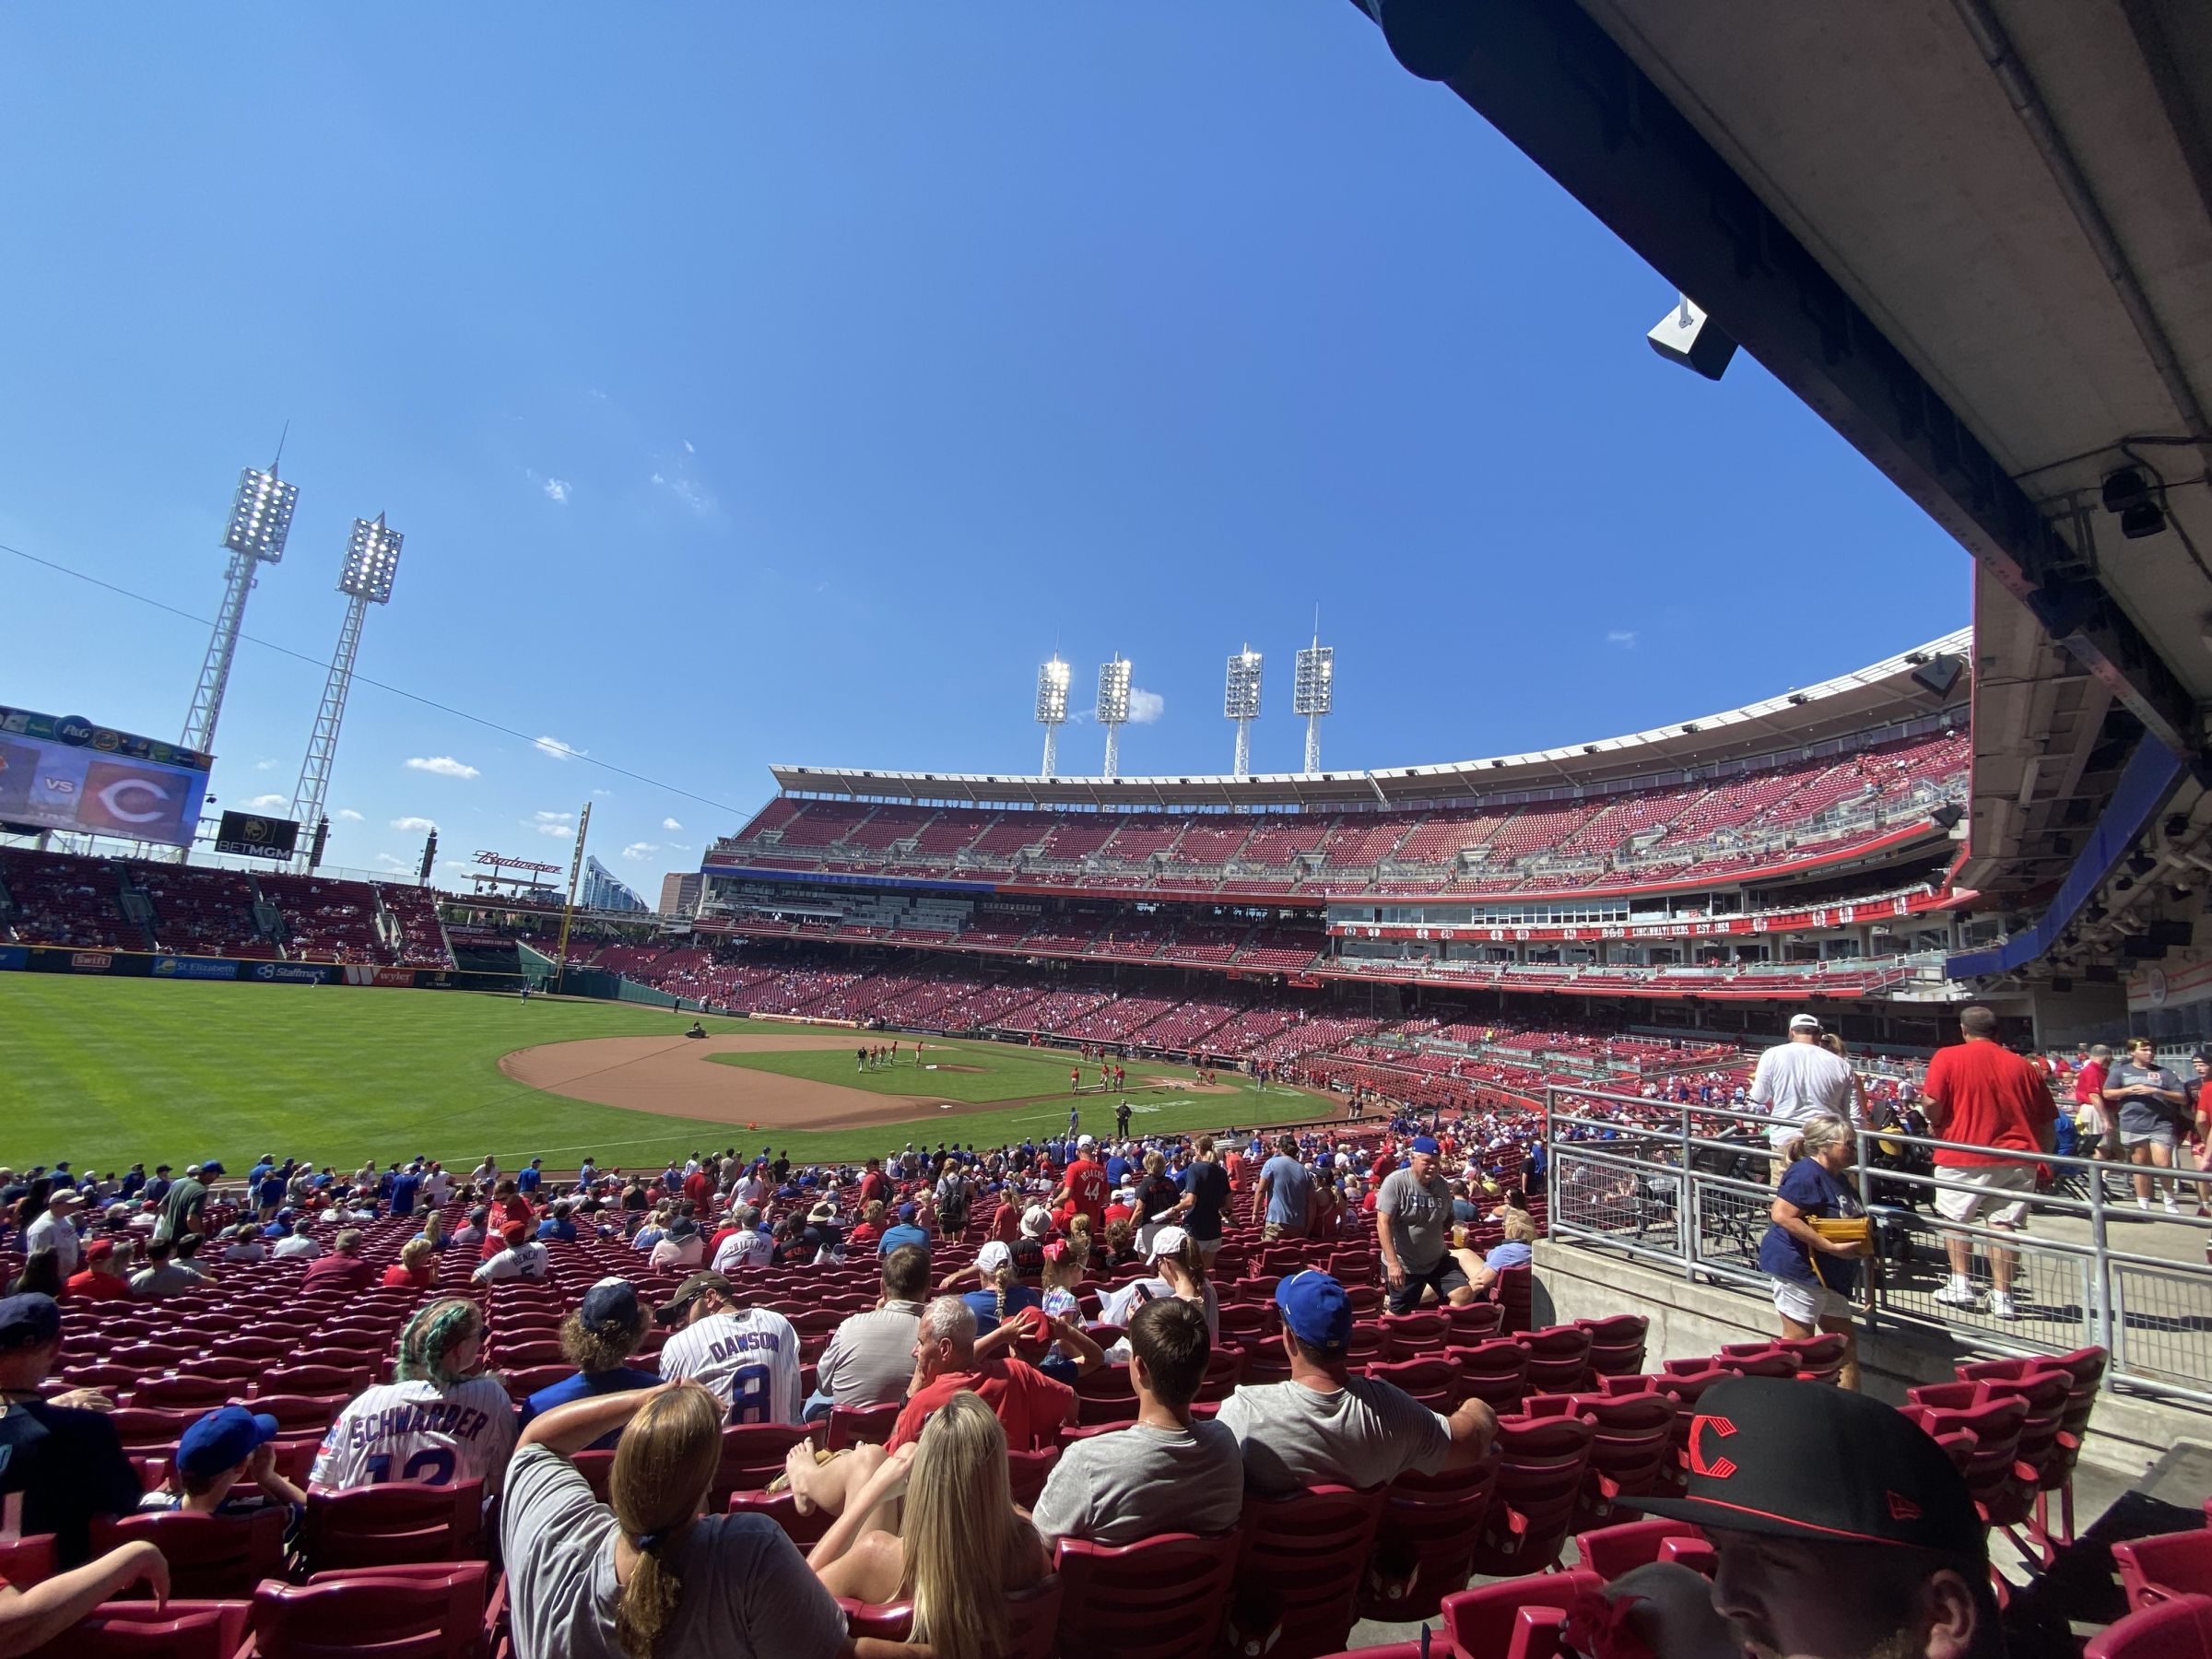 Section 124 at Great American Ball Park 